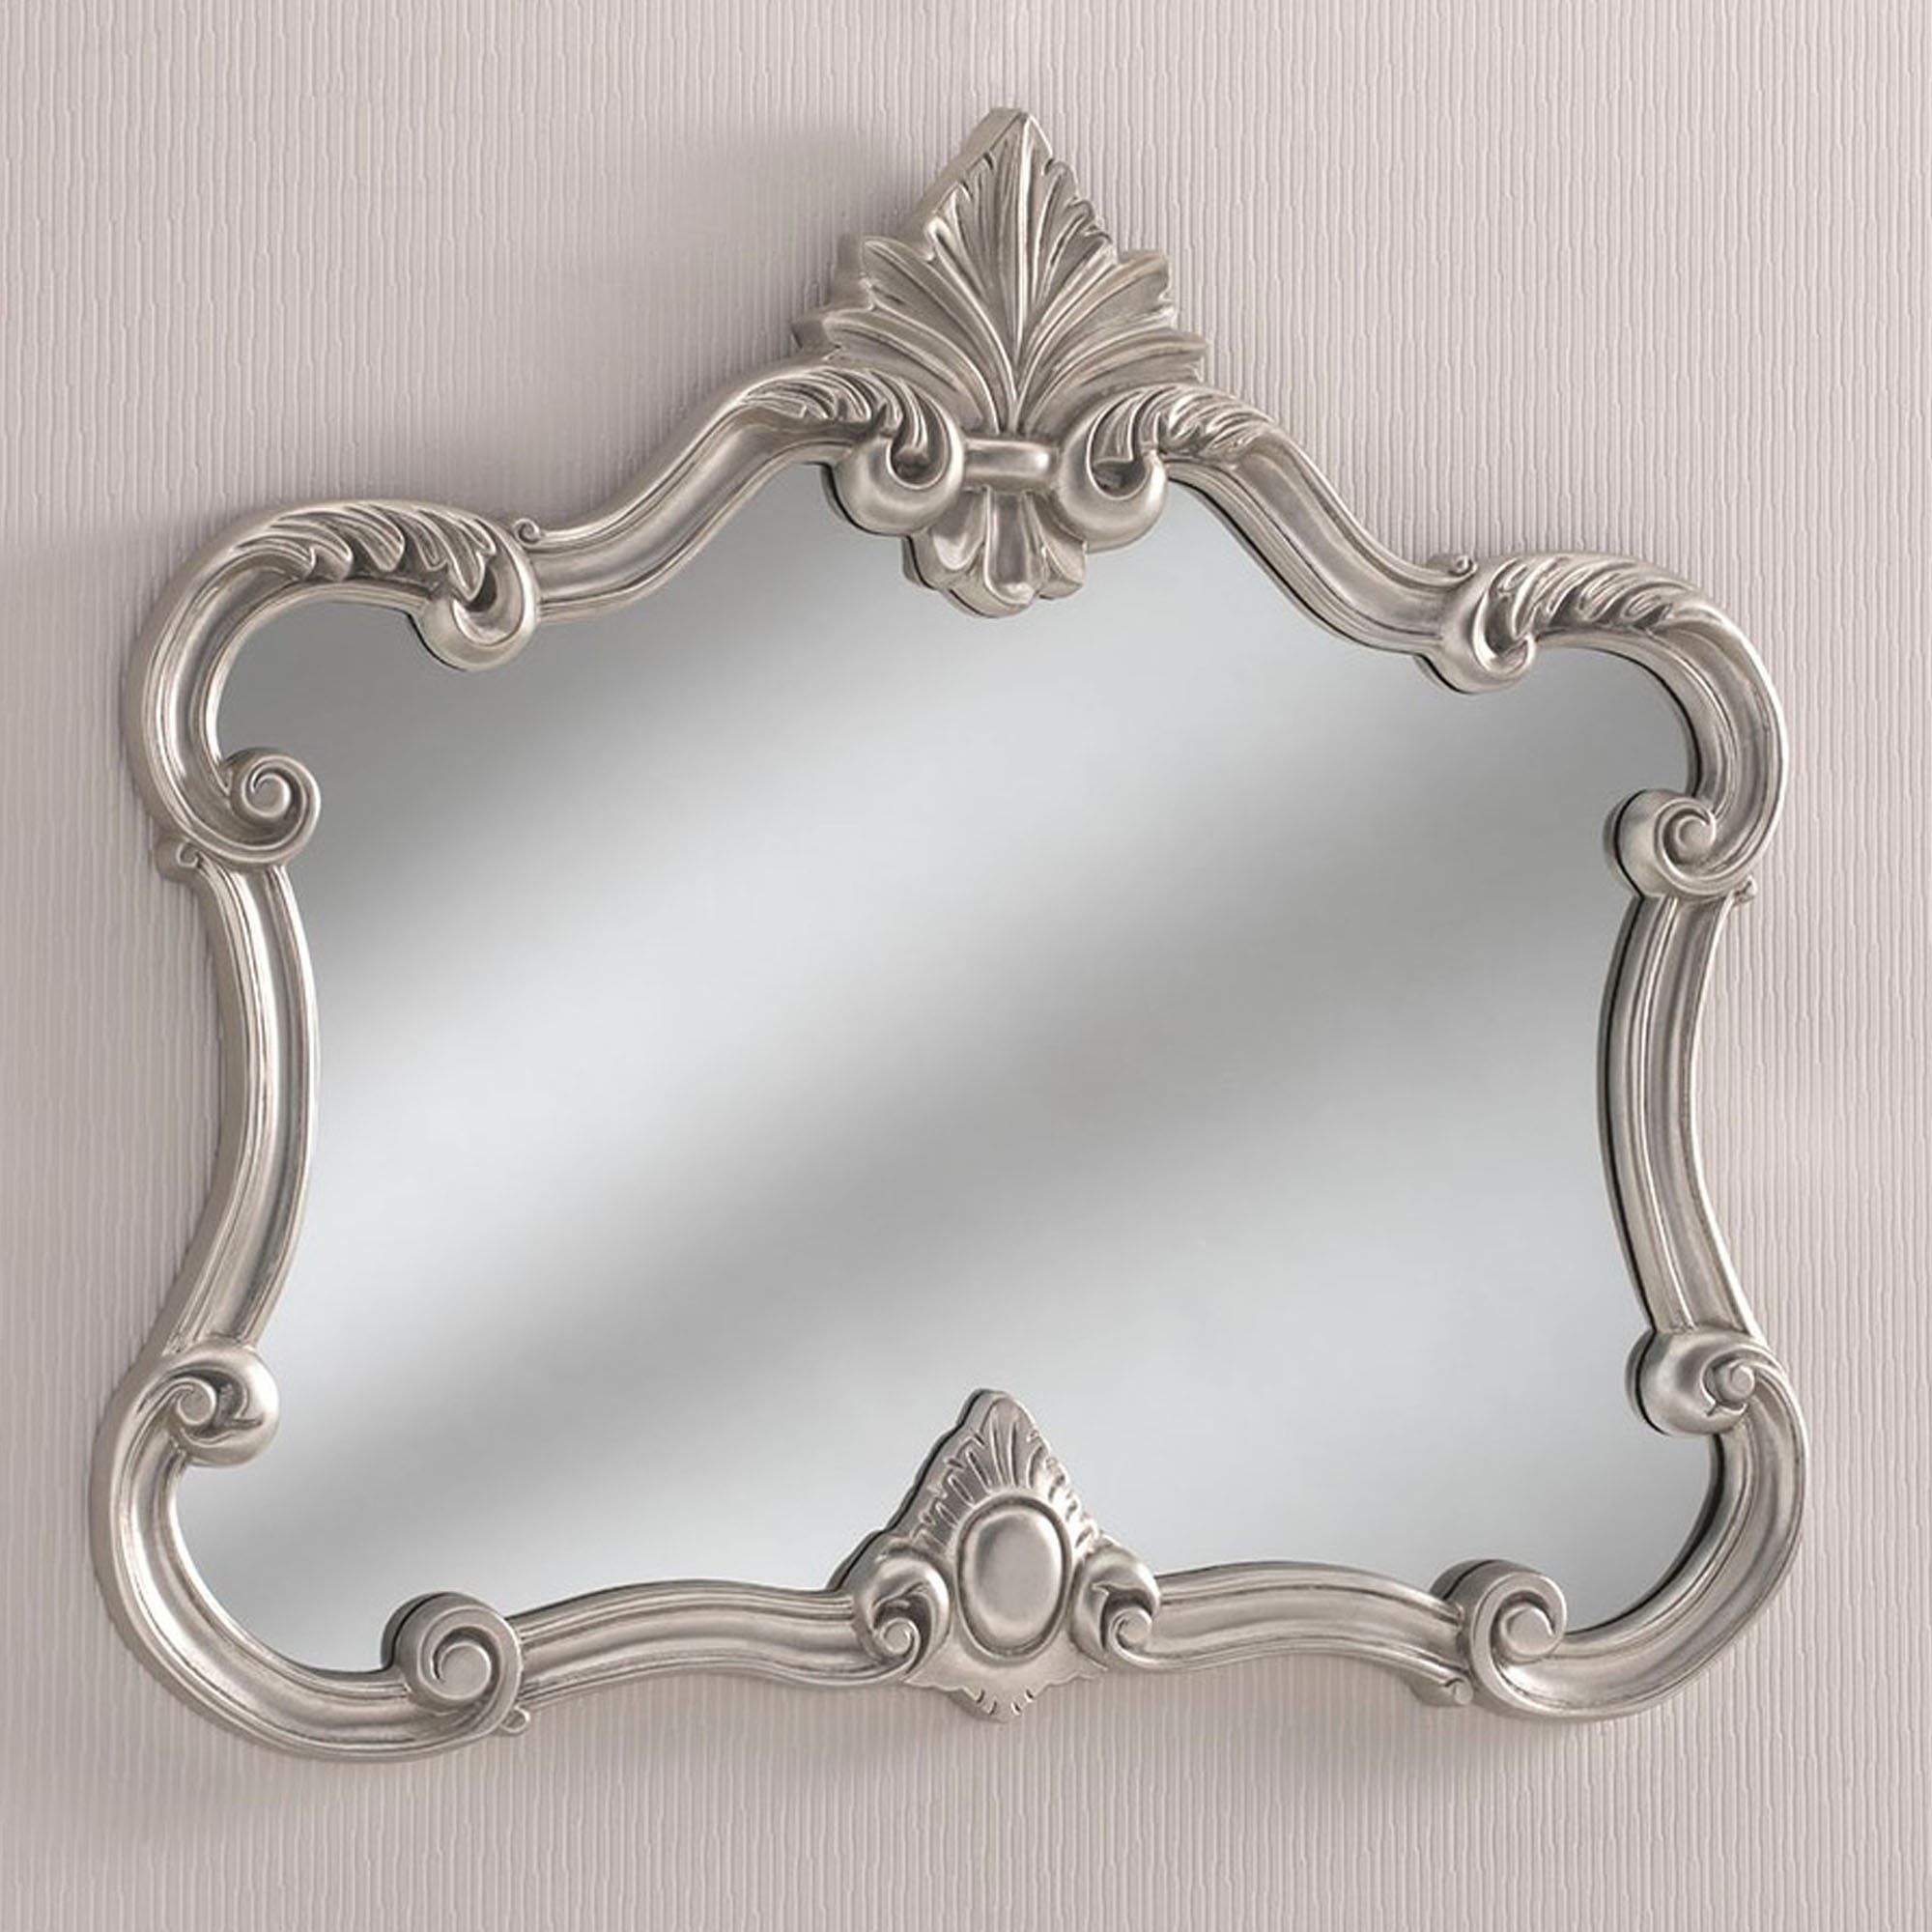 Antique French Style Pewter Decorative Wall Mirror | Homesdirect365 Throughout Booth Reclaimed Wall Mirrors Accent (View 12 of 15)